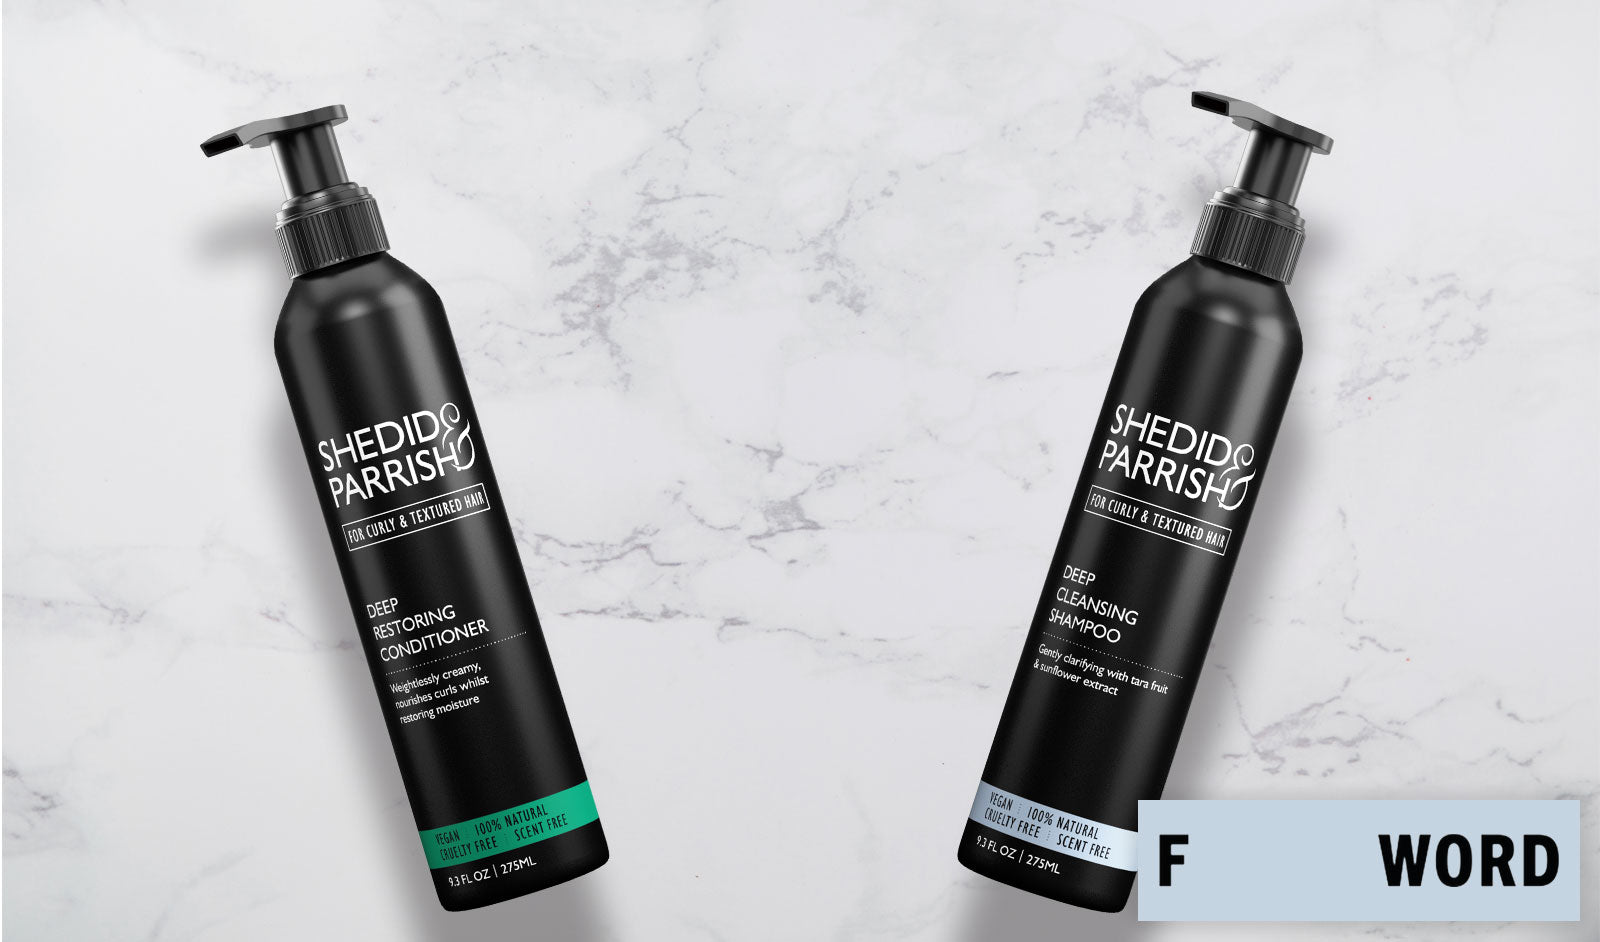 I'm gonna wash that he, she or them right outta my hair: The shampoo + conditioner edit